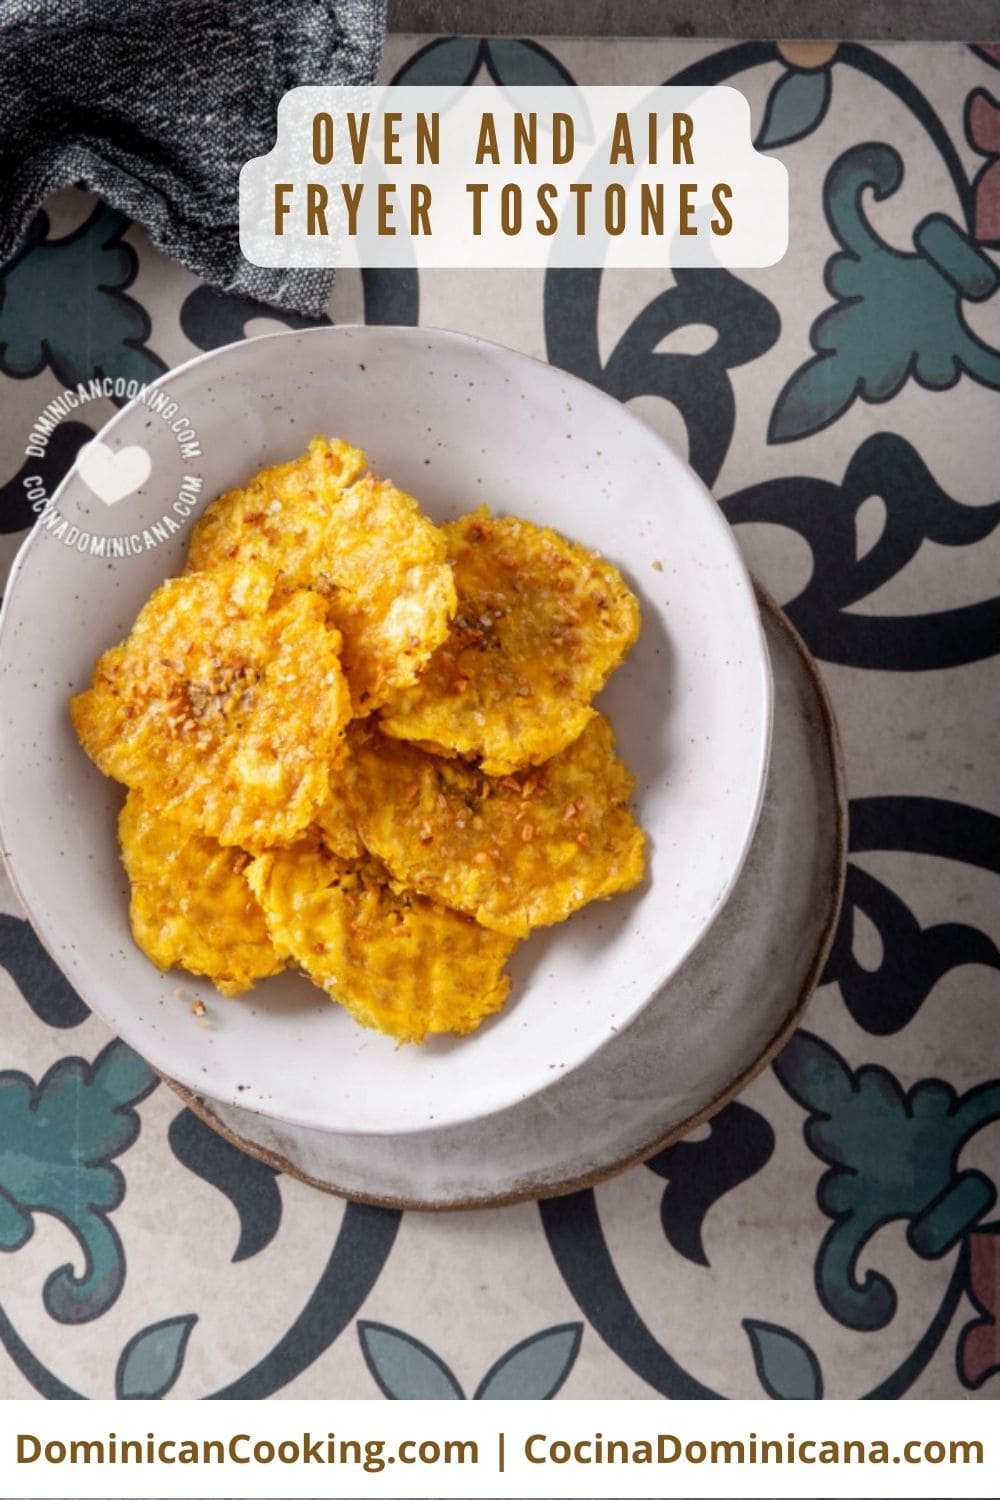 Oven and air fryer tostones.